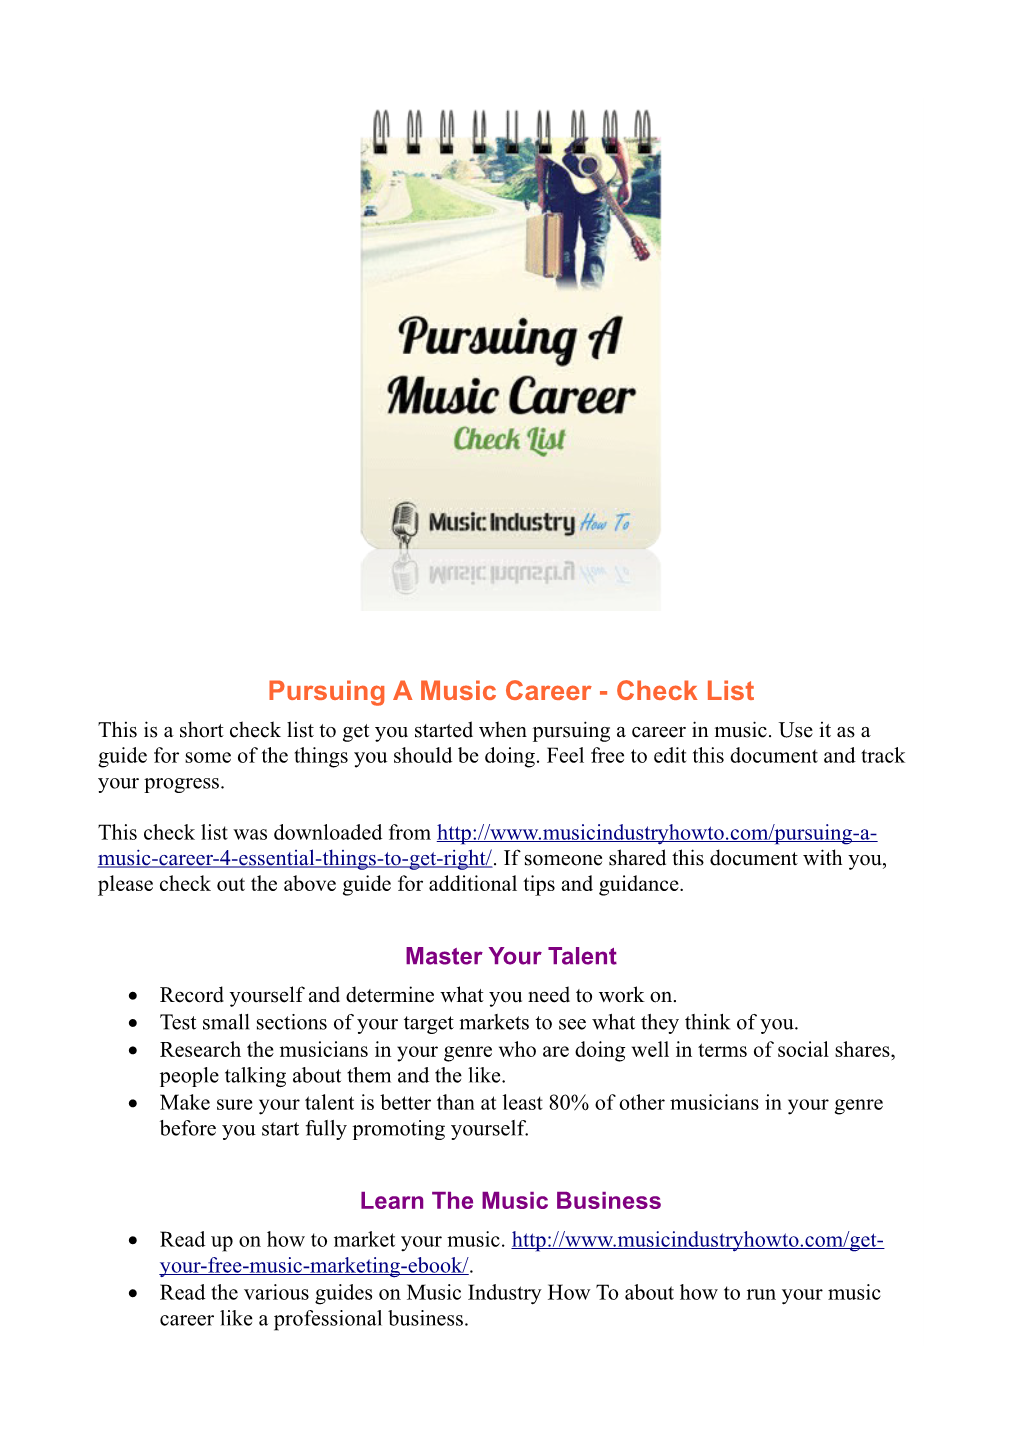 Pursuing a Music Career - Check List